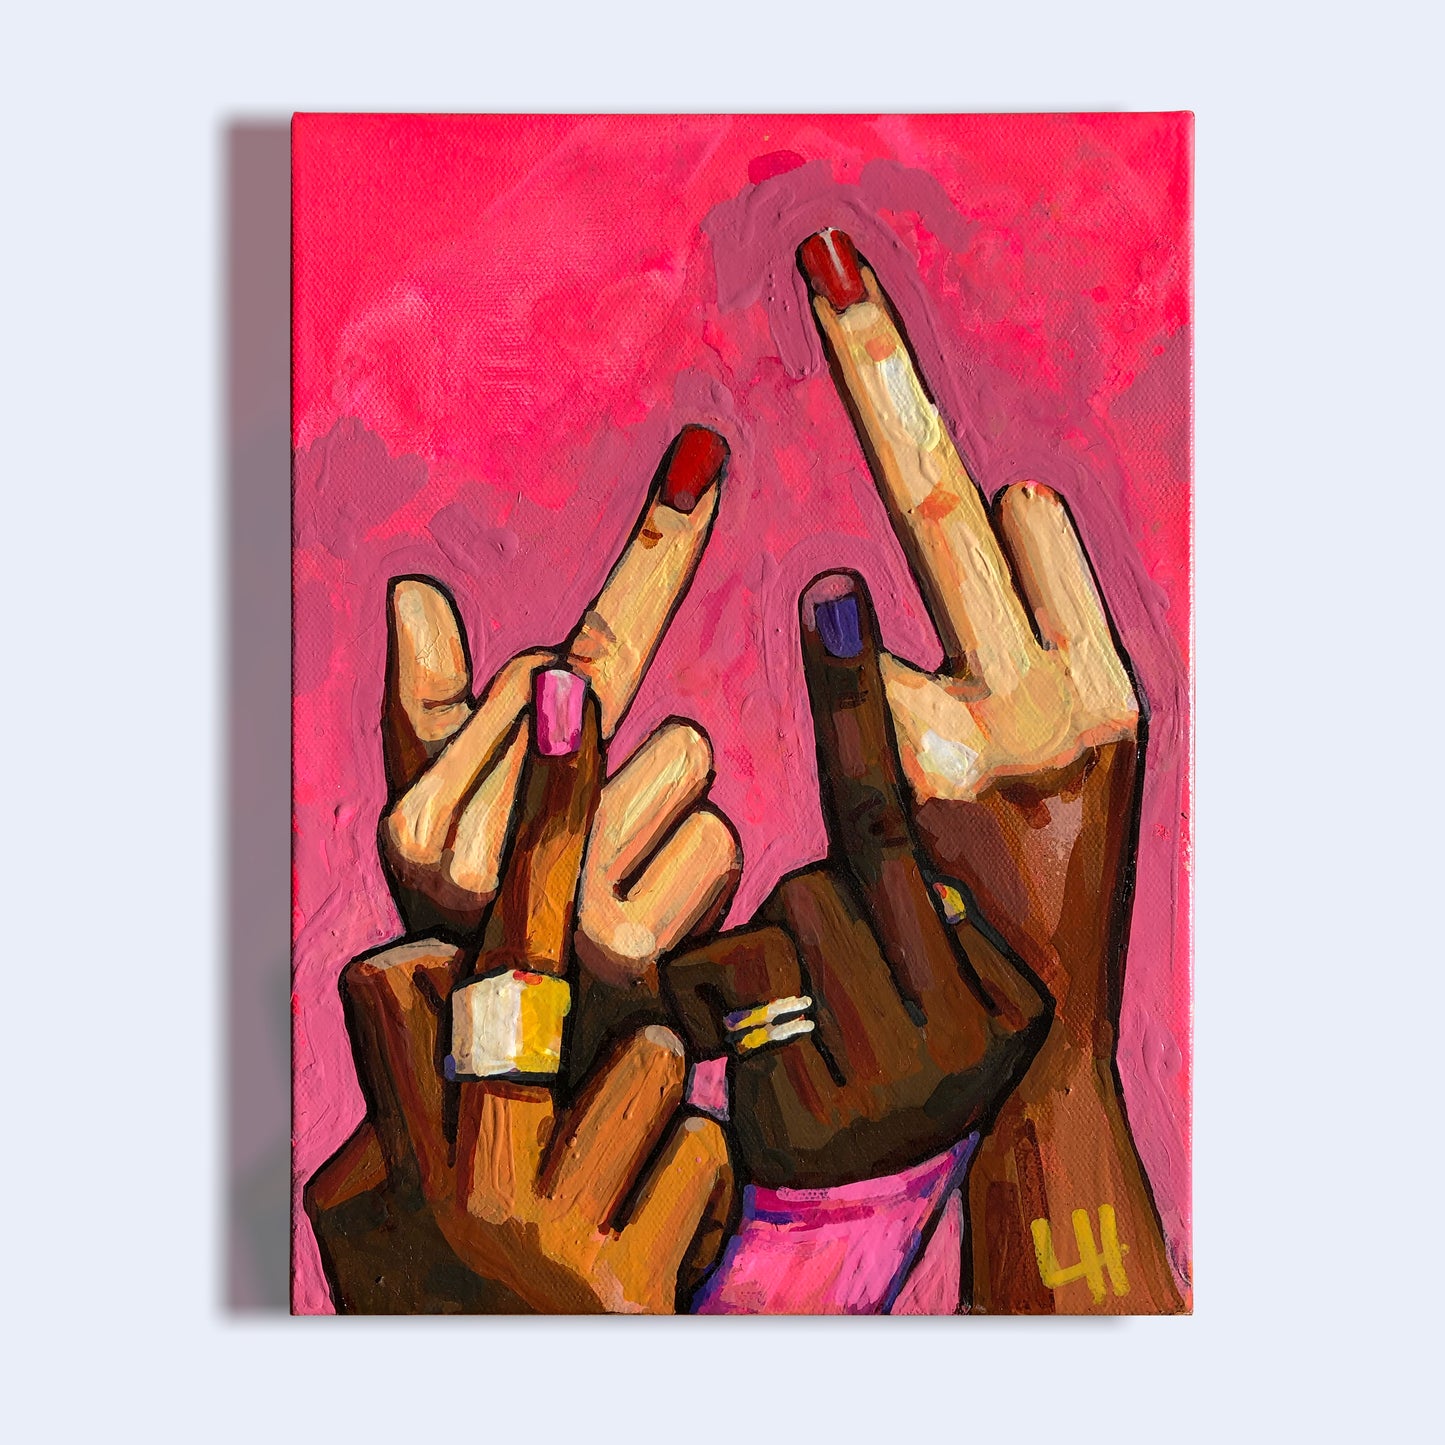 4 Middle Fingers Up No. 2